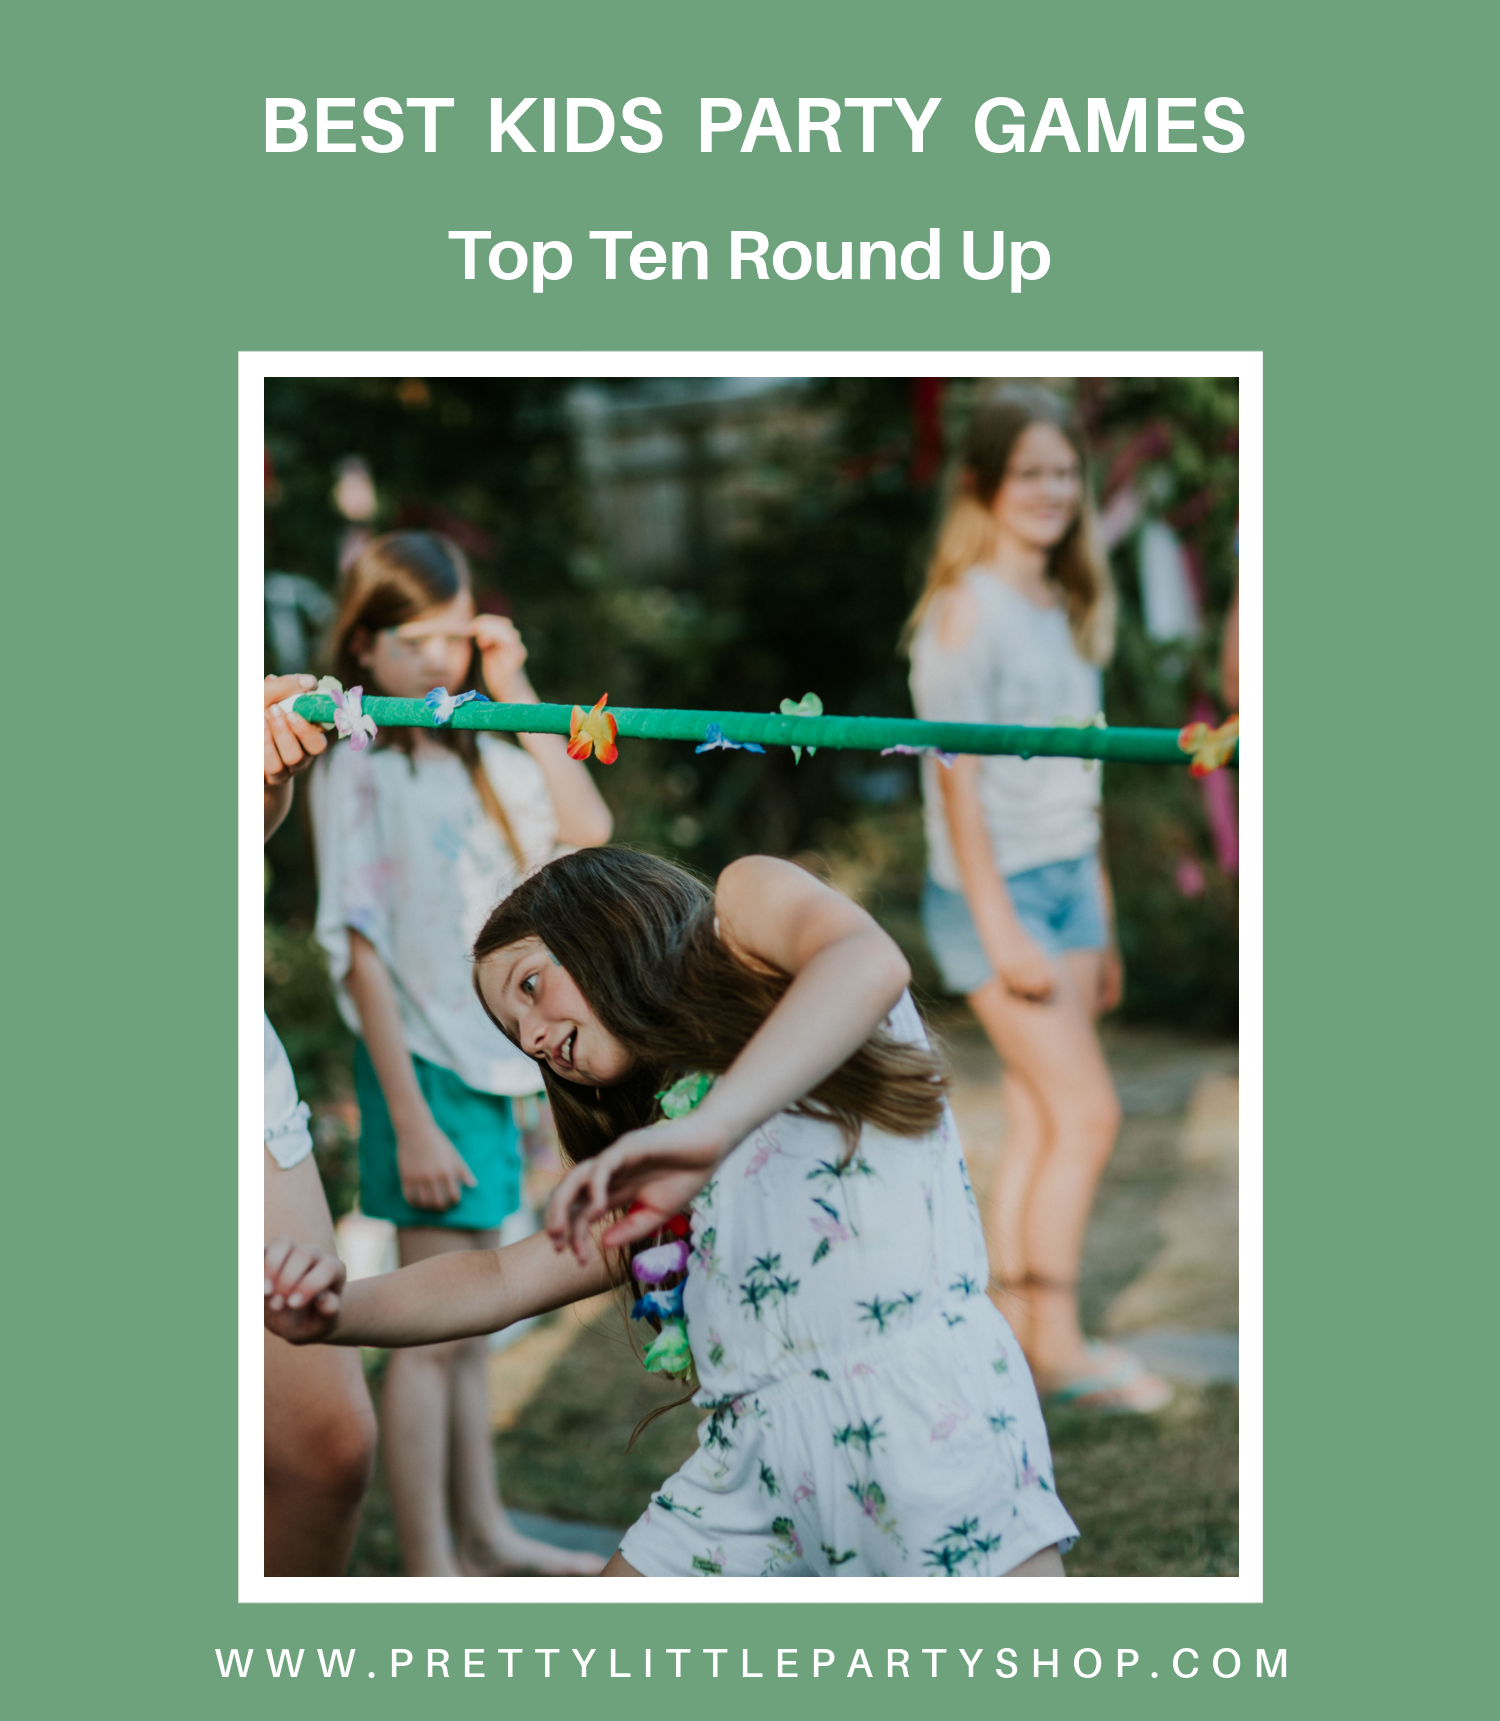 The Top 14 Party Games for Kids